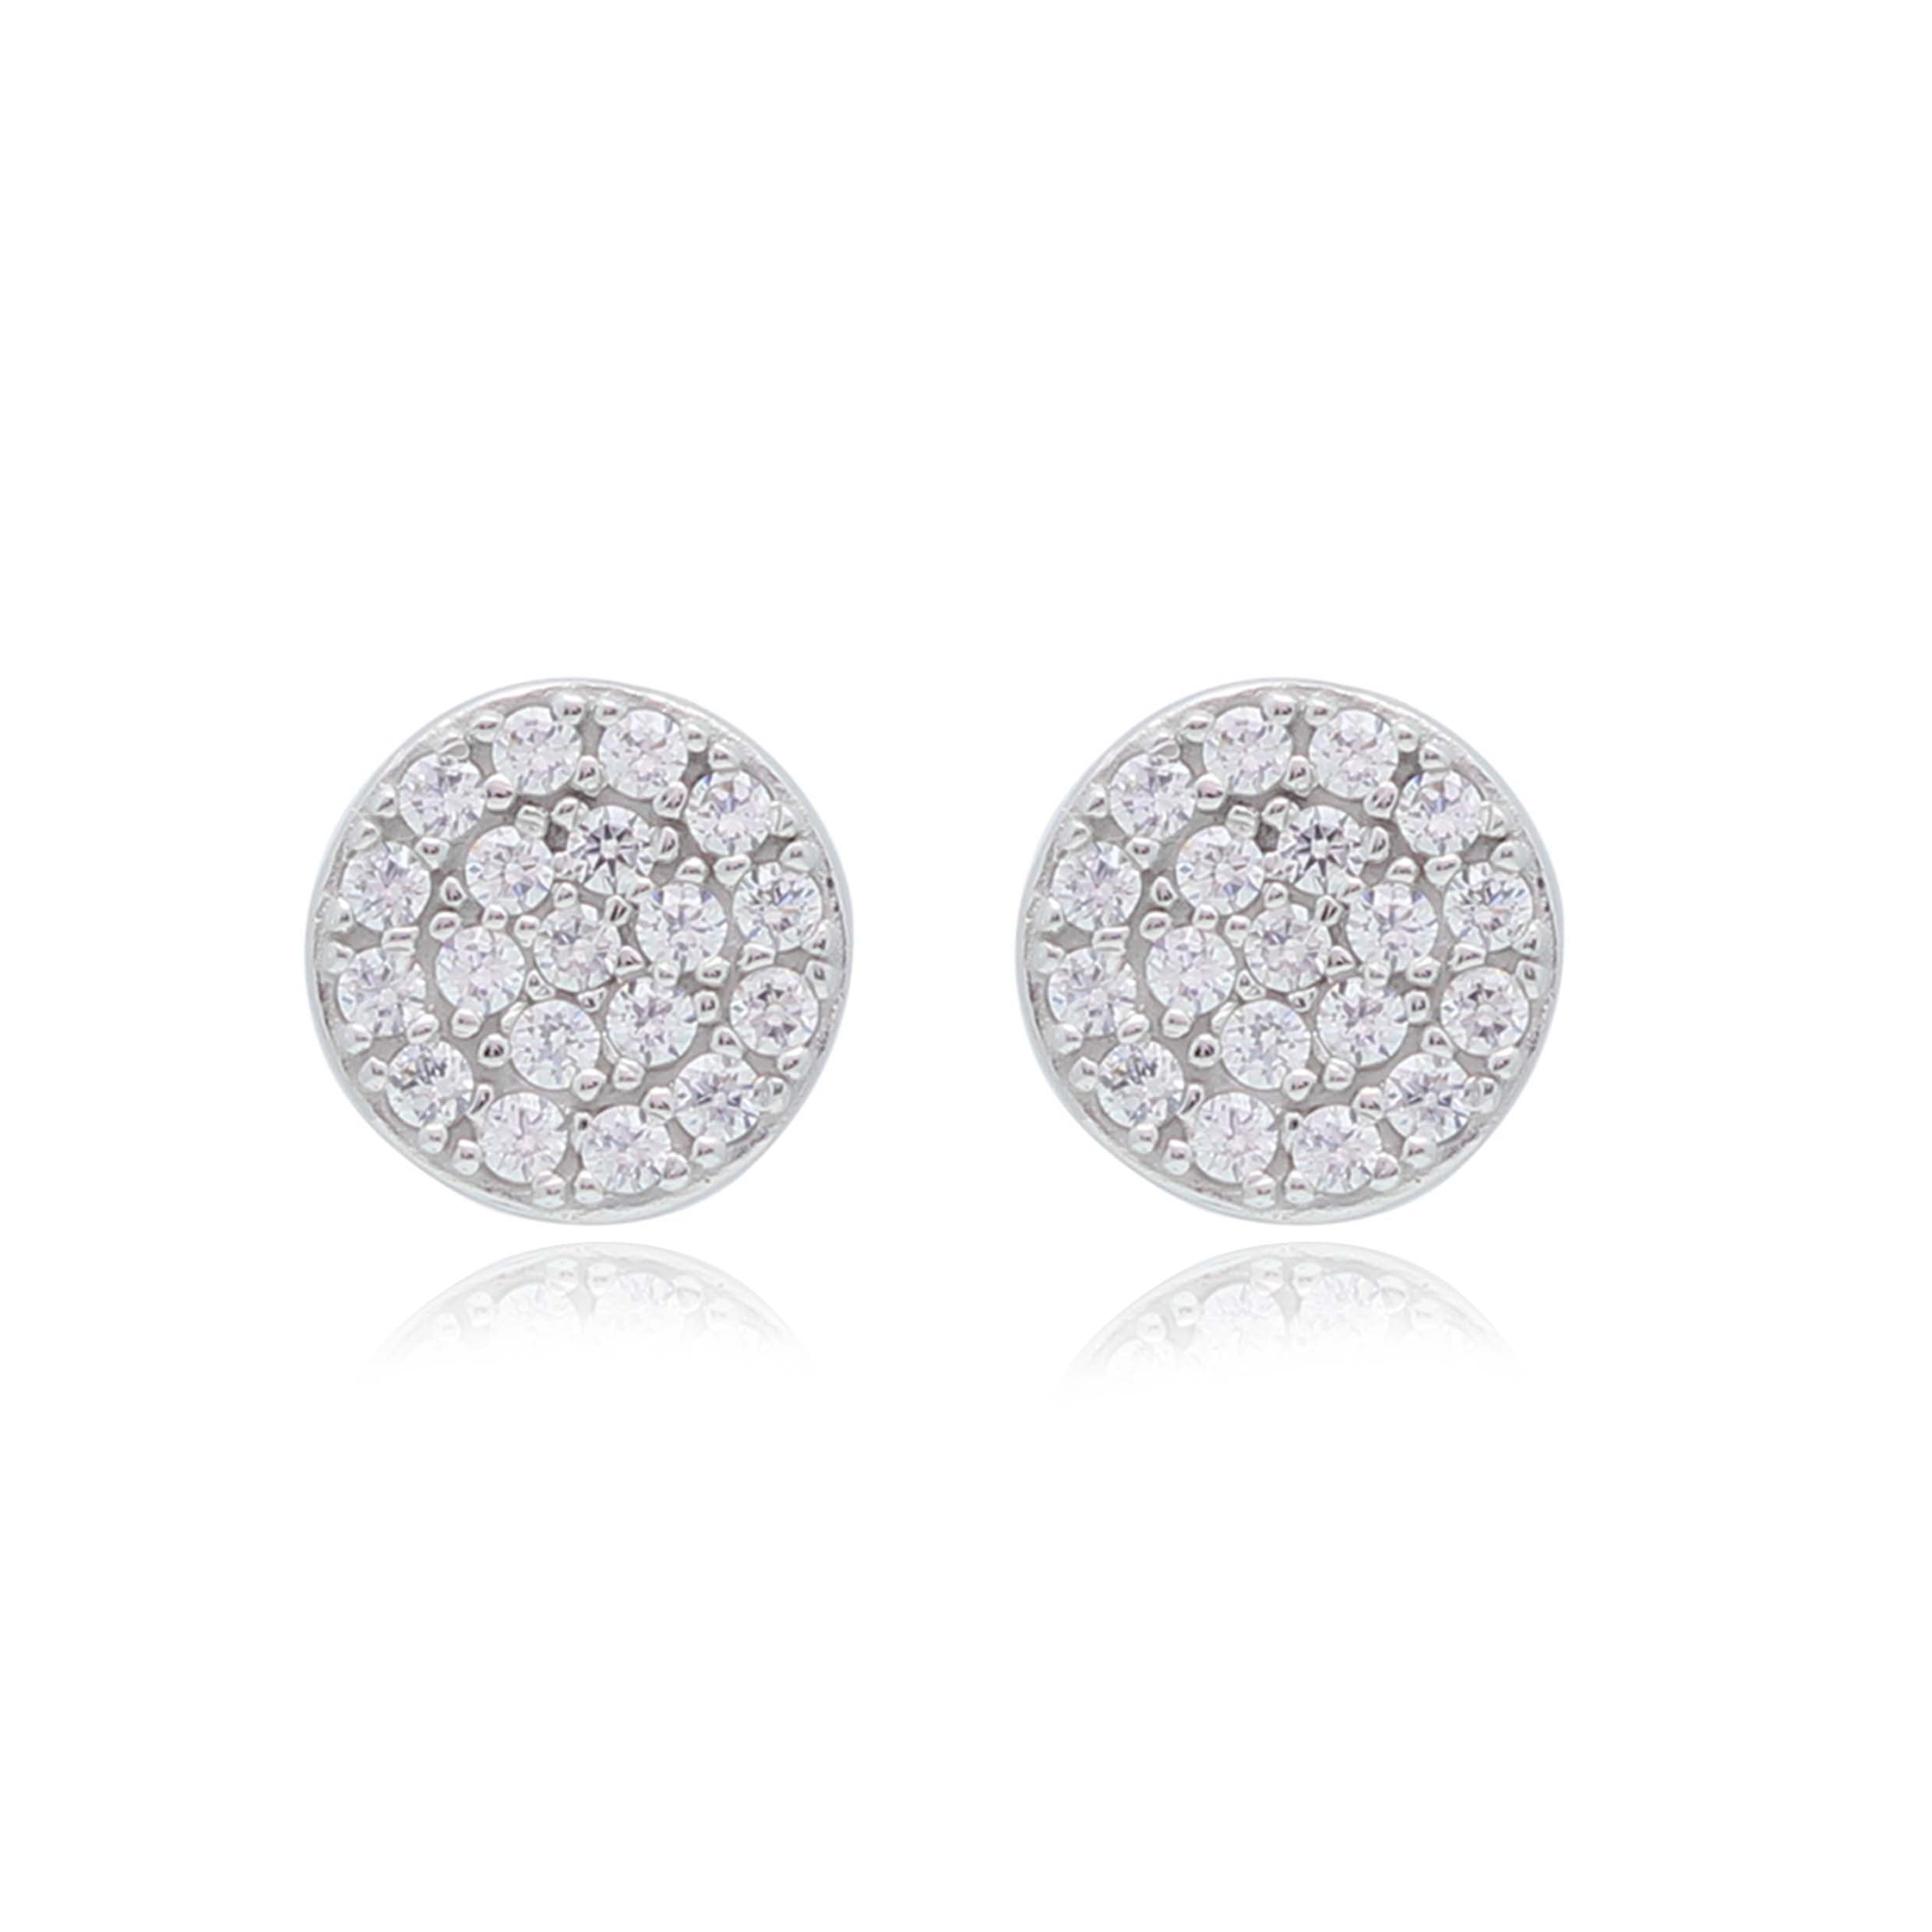 Disc Earrings in 14K Gold with CZ Pave